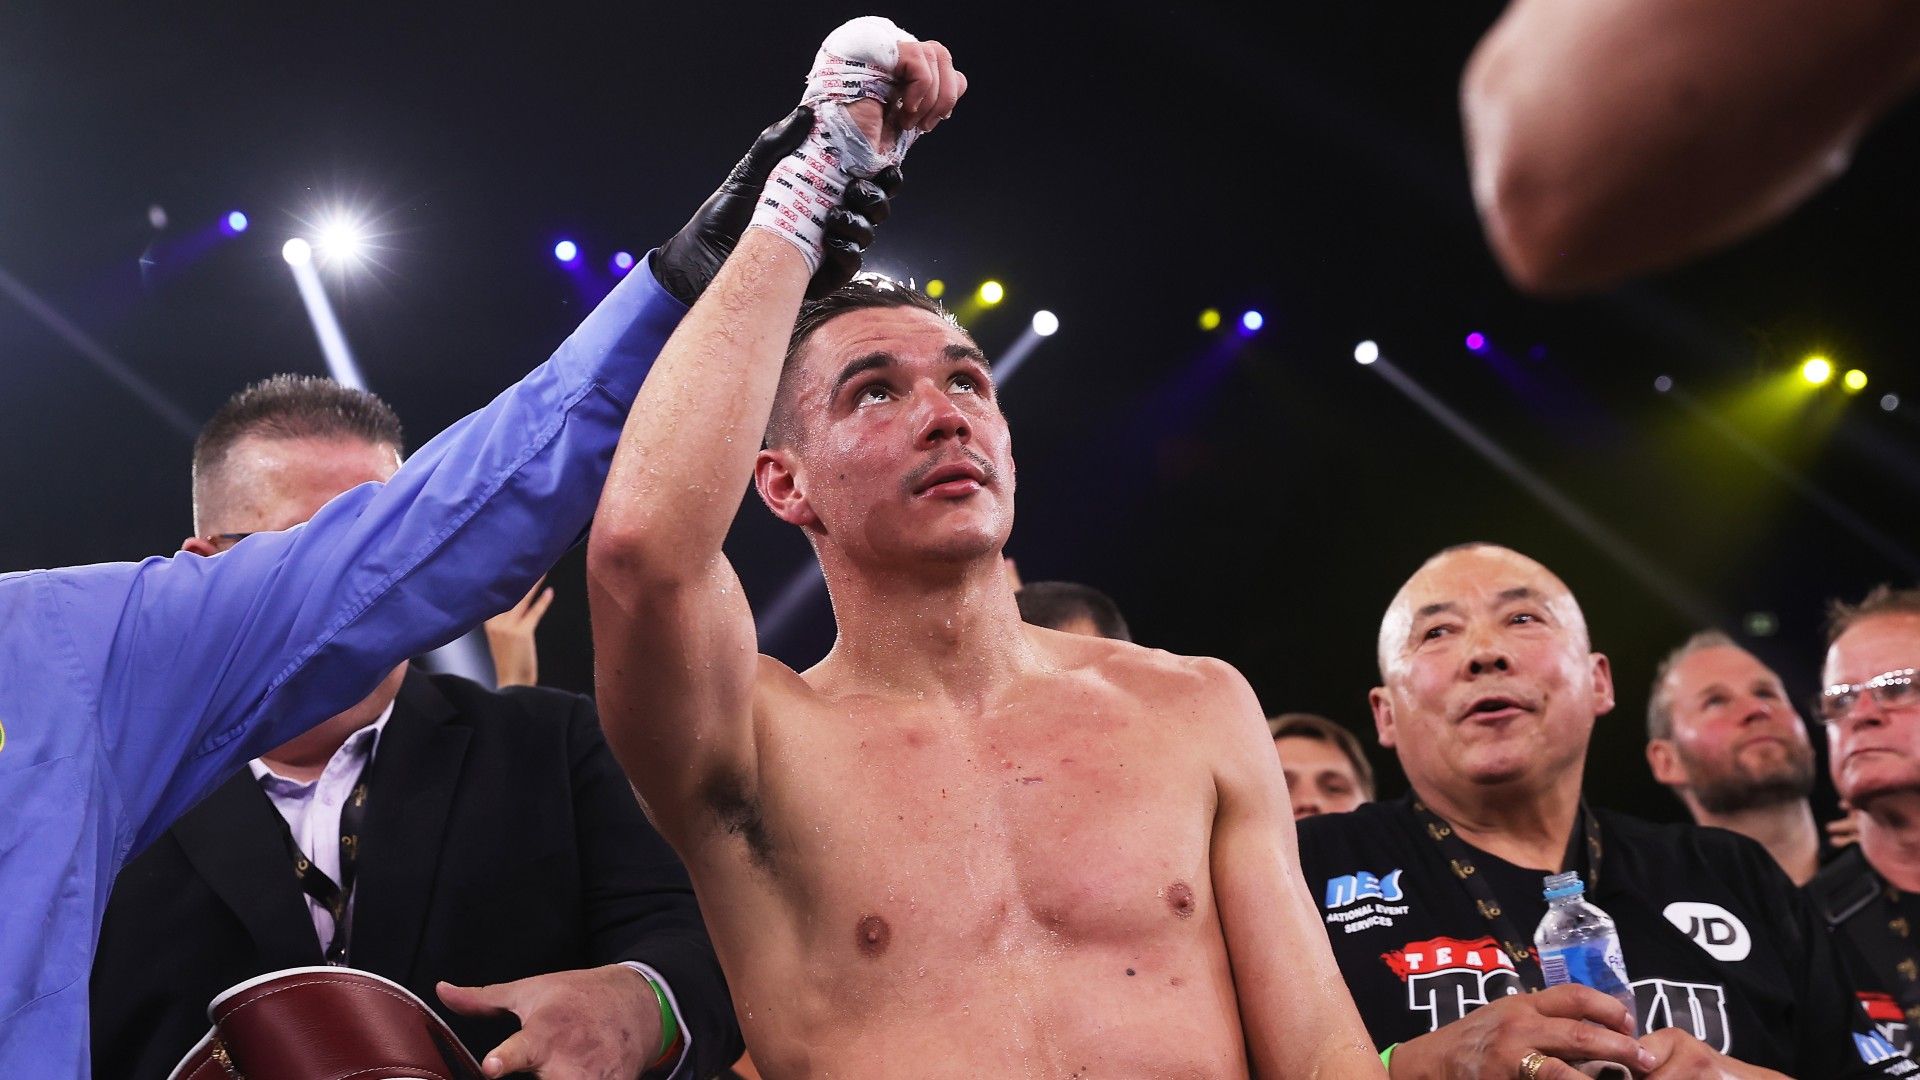 'Do some work': Tim Tszyu calls on dad Kostya to get organising if he wants title defence in Russia